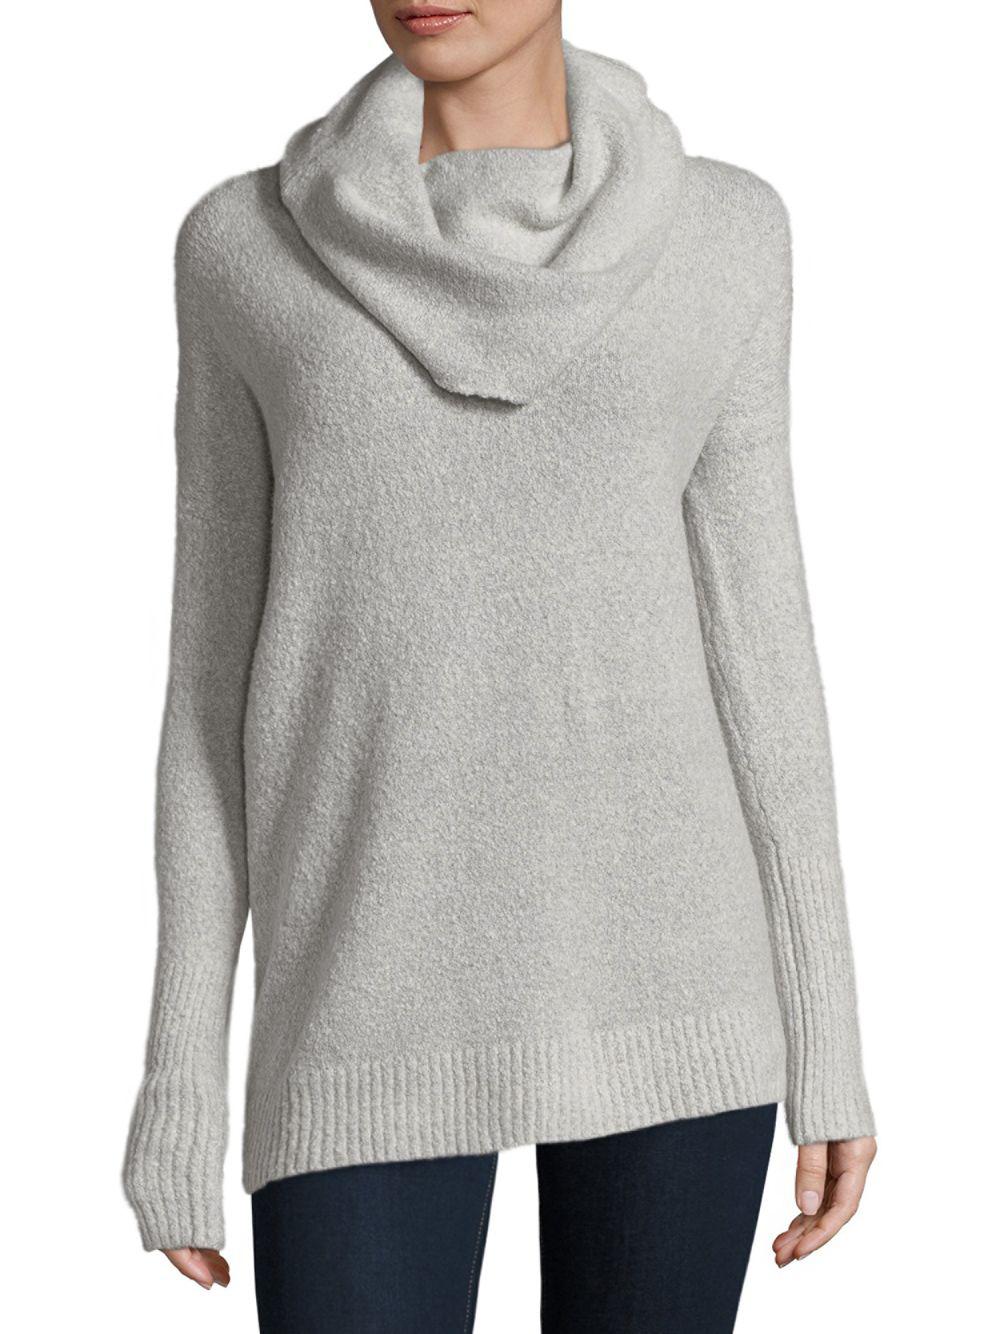 French connection Cowlneck Sweater in Gray | Lyst